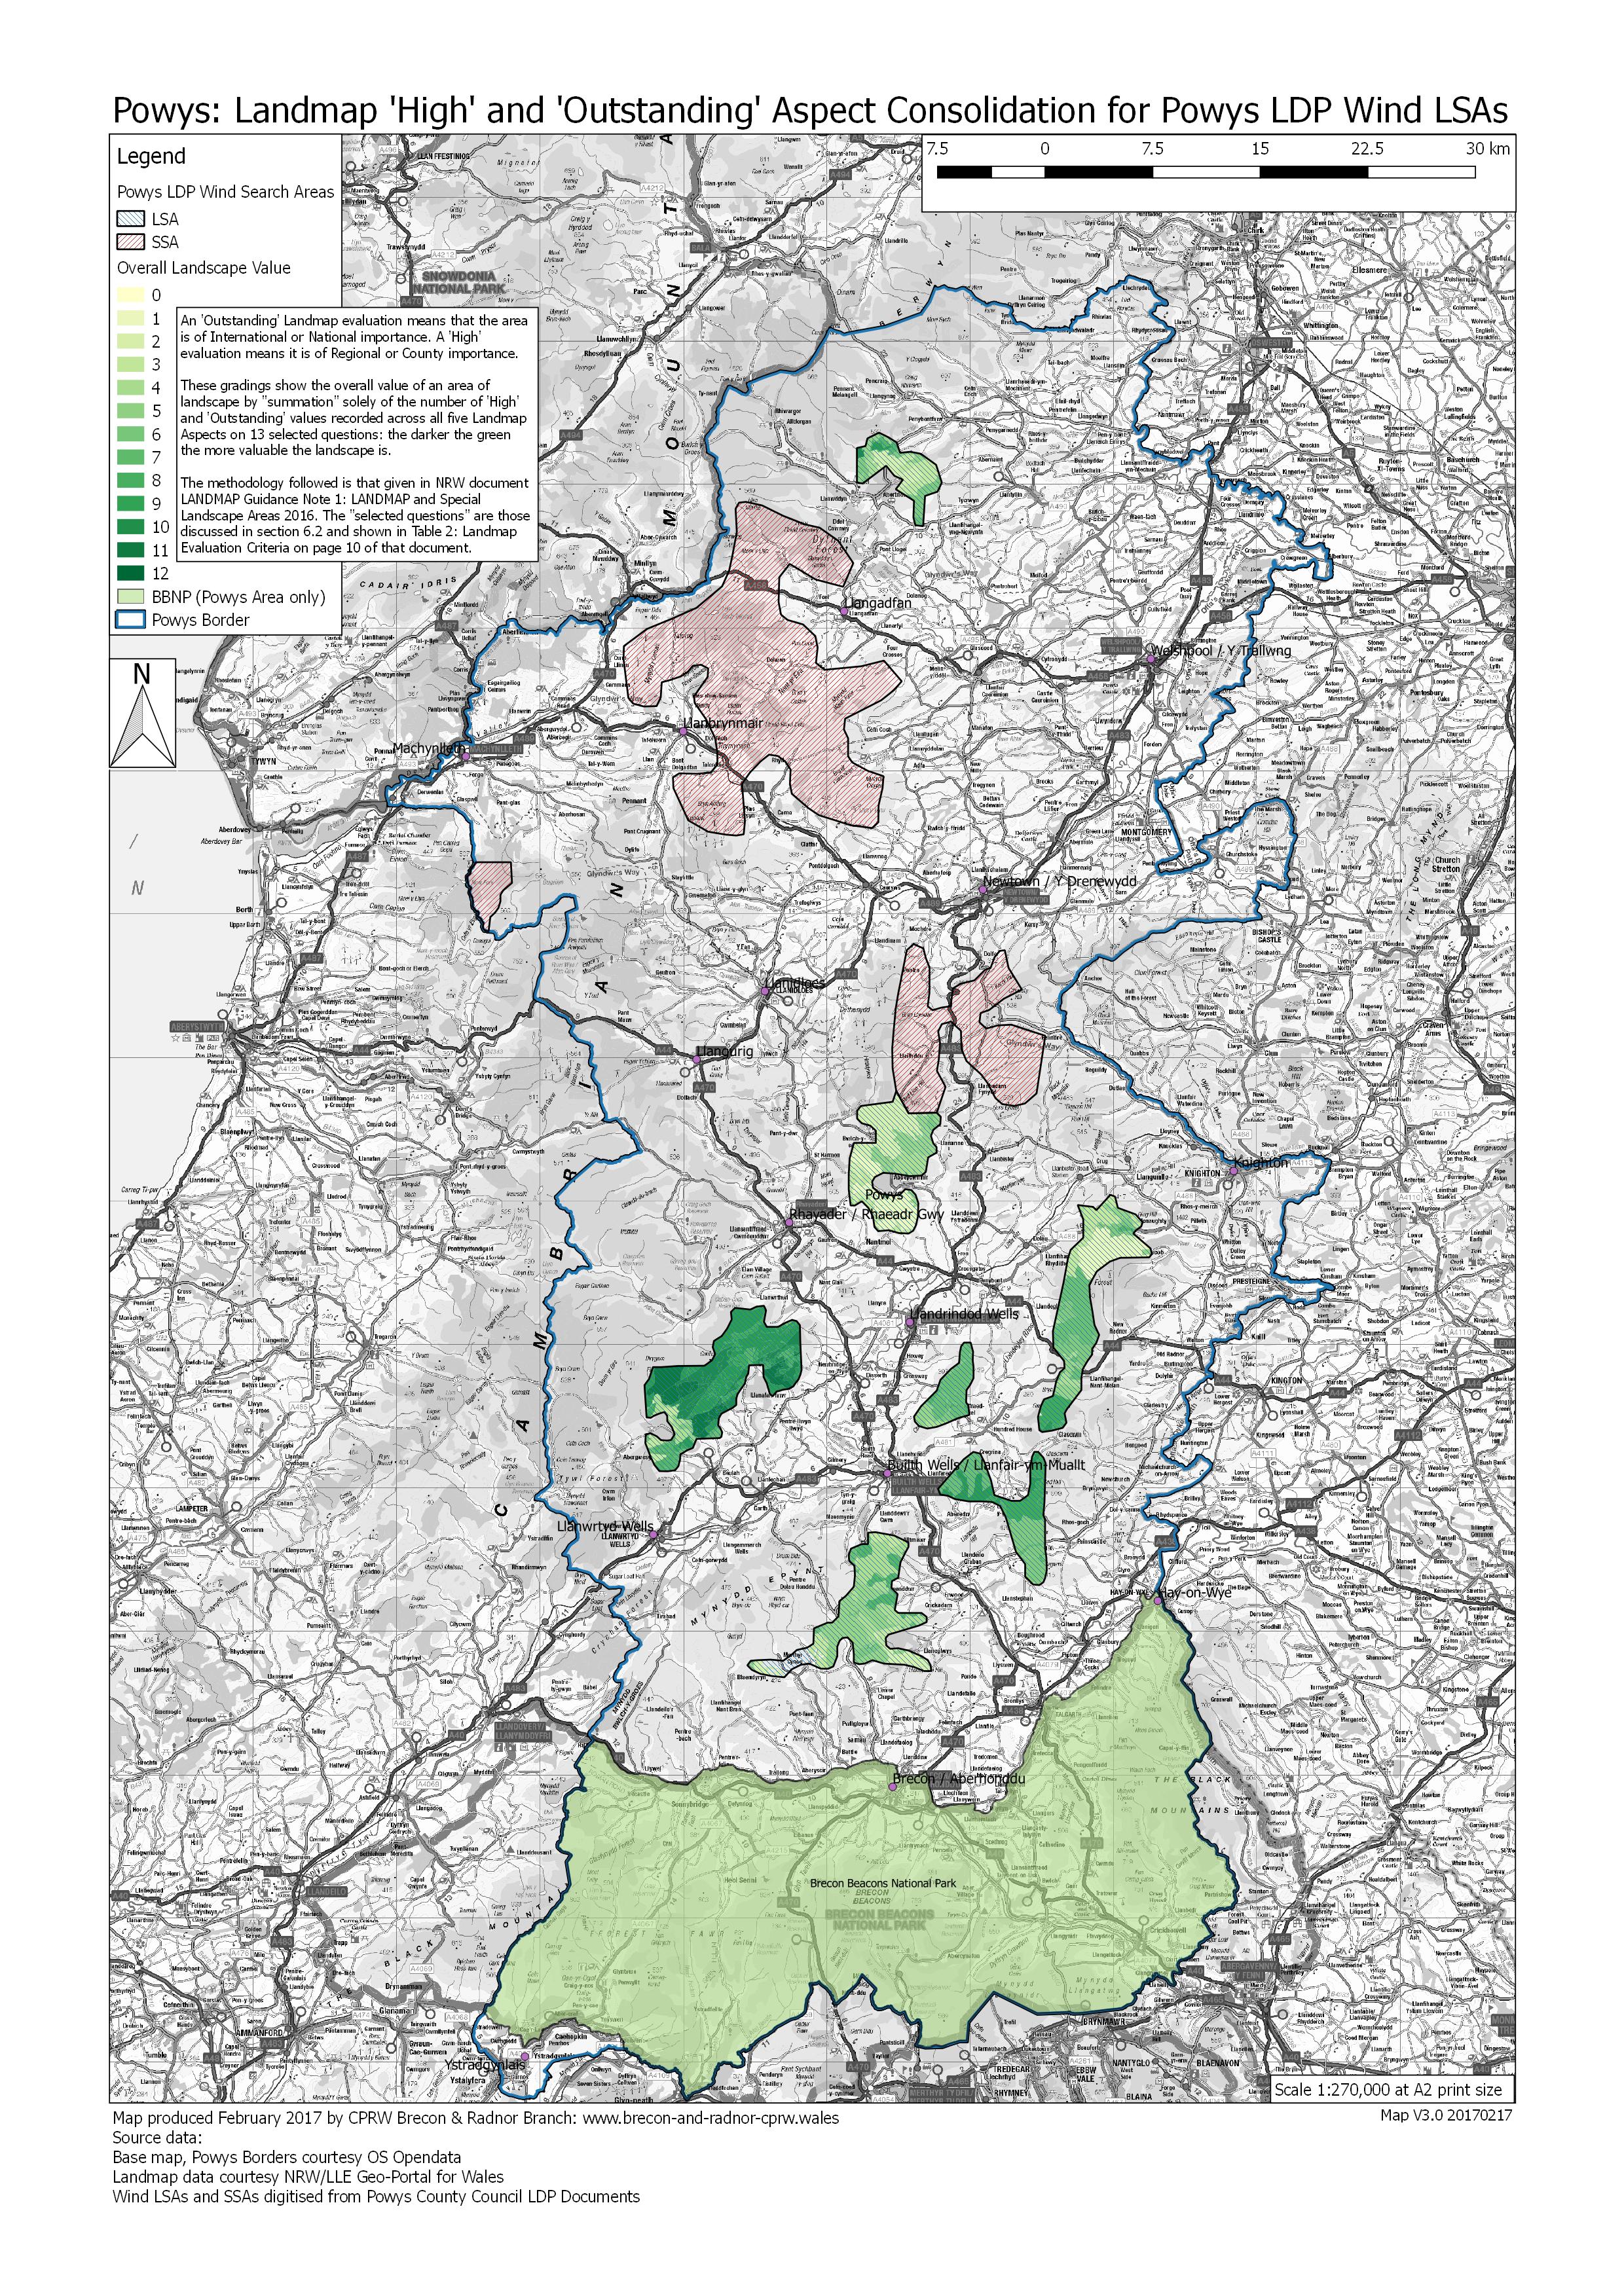 Map 2: Powys LDP Area: Consolidation of LANDMAP ‘High’ & ‘Outstanding’ Aspect areas for the proposed Wind LSAs